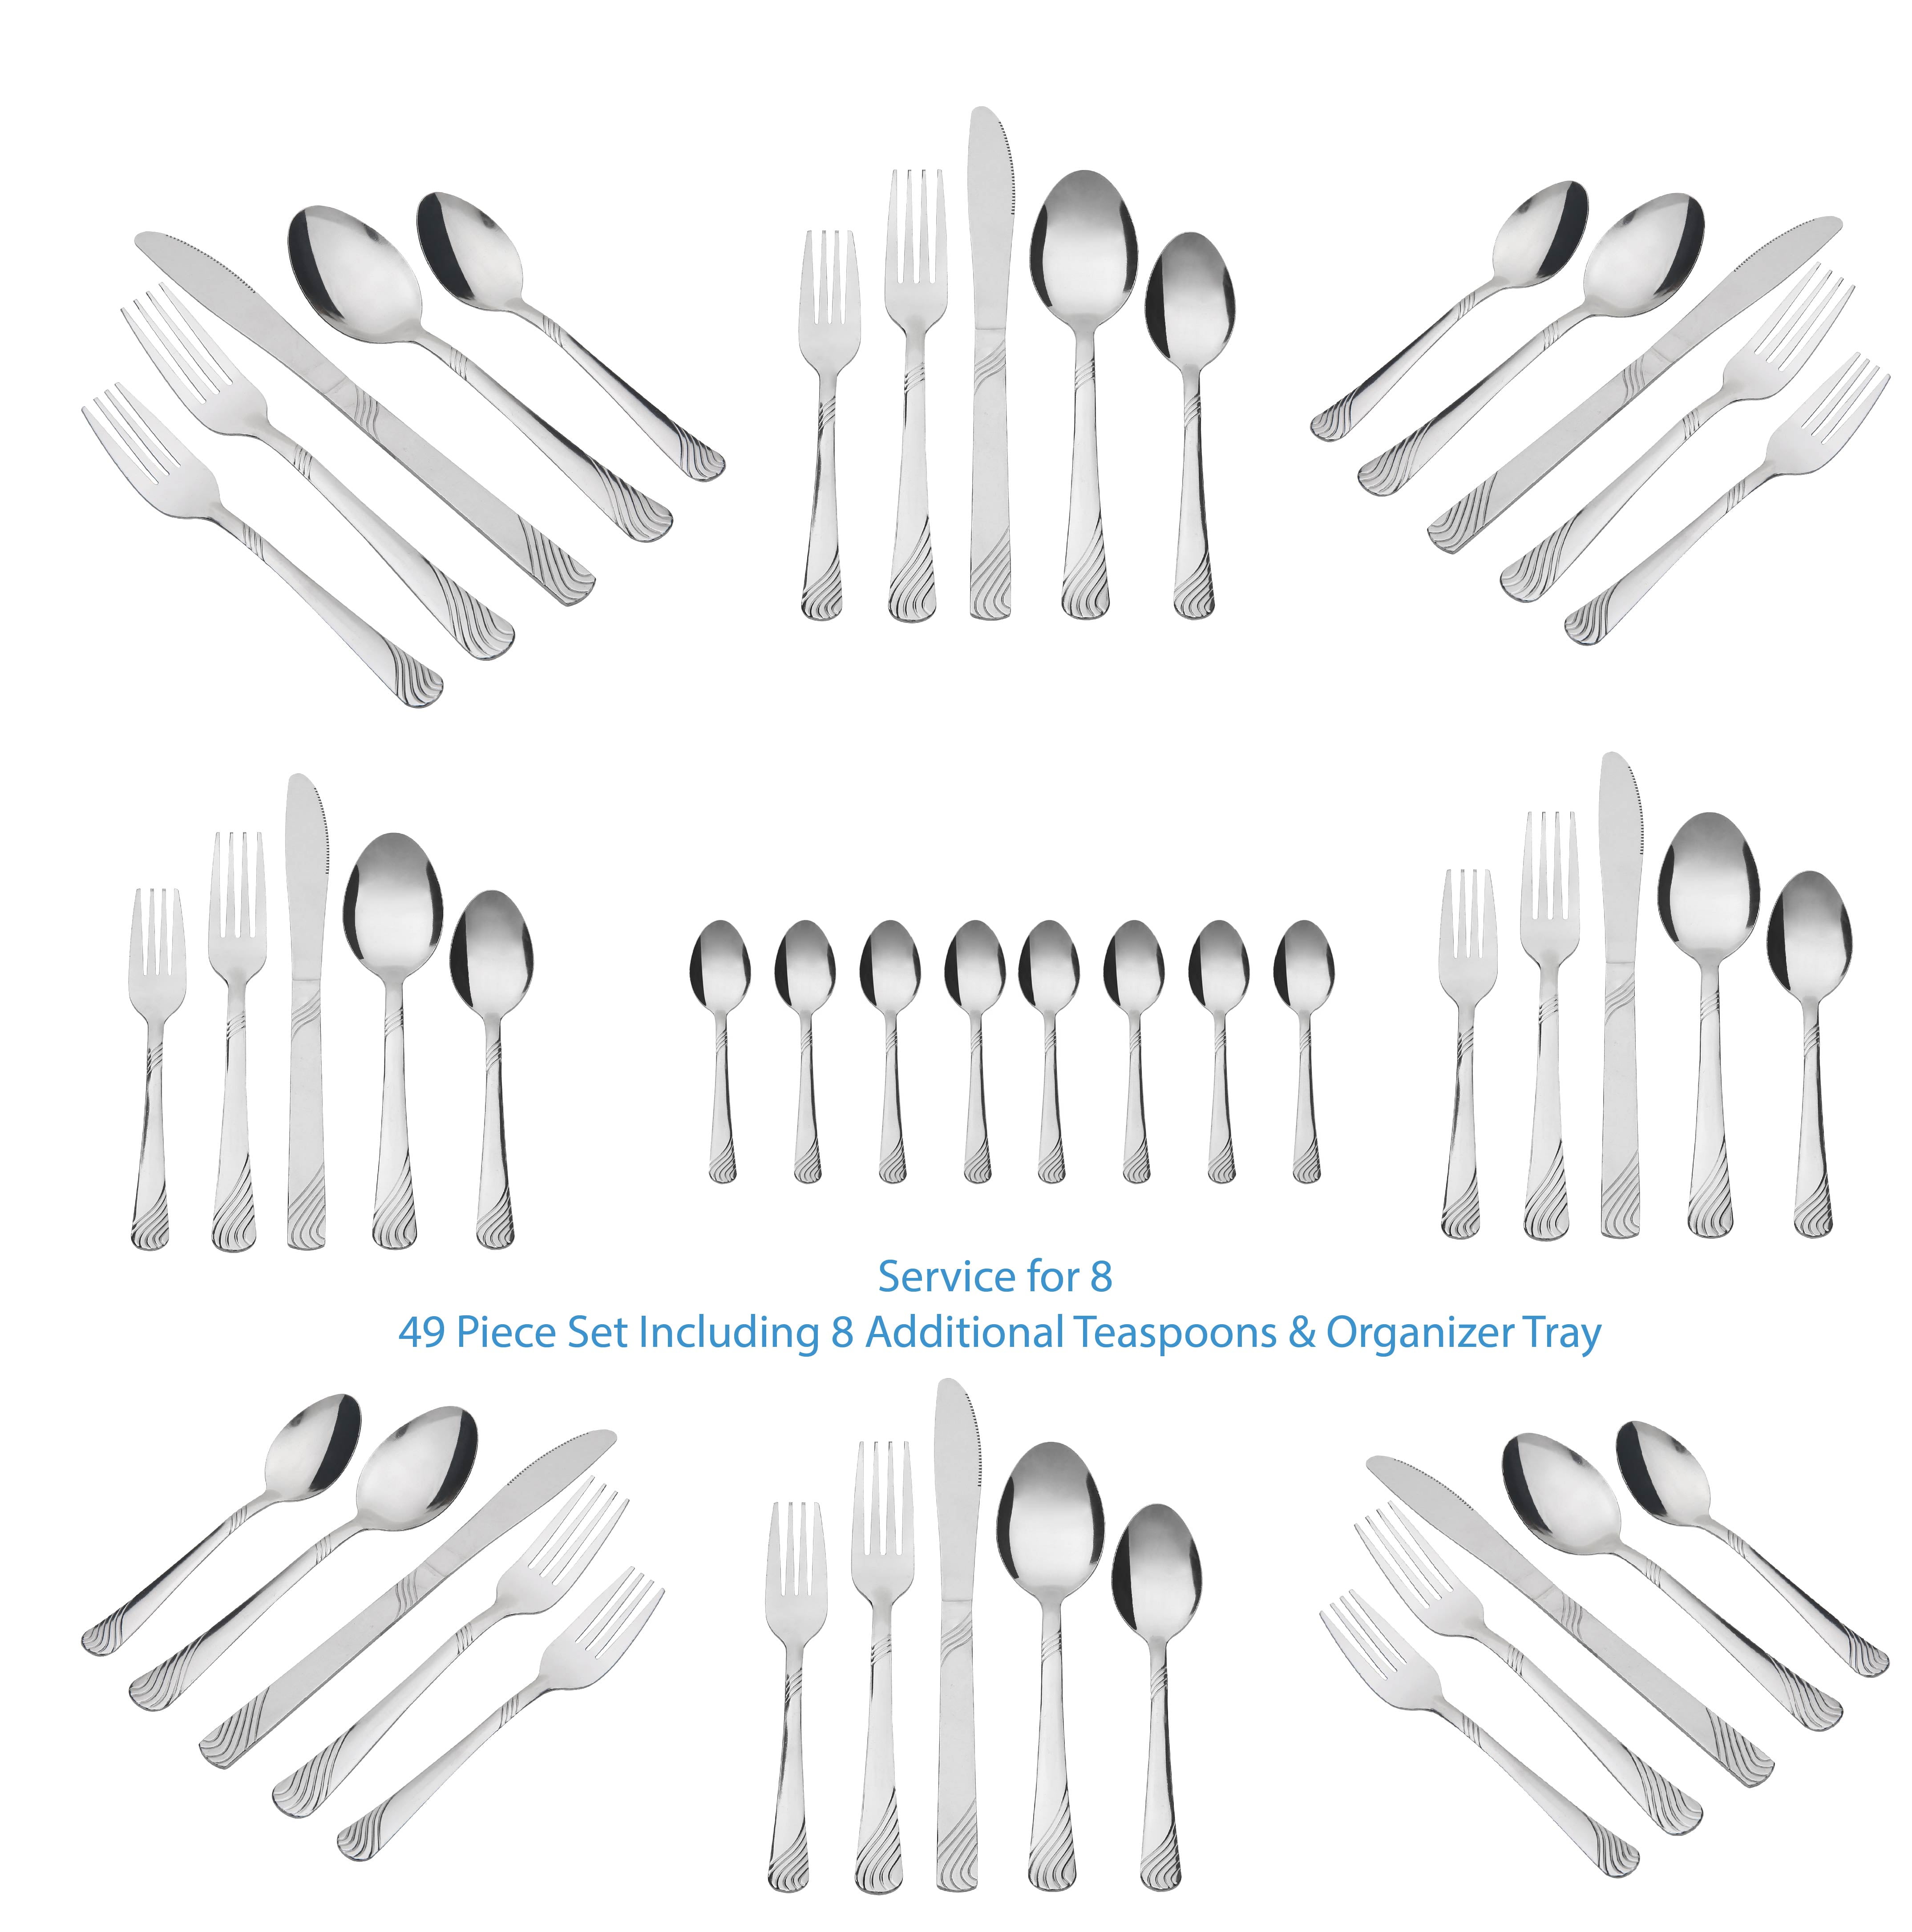 Tribal Cooking 48 Piece Silverware Set - Service for 8 - Stainless Steel Flatware Serving Set - Cutlery Set - Knives, Fork, and Spoon - Utensil Sets